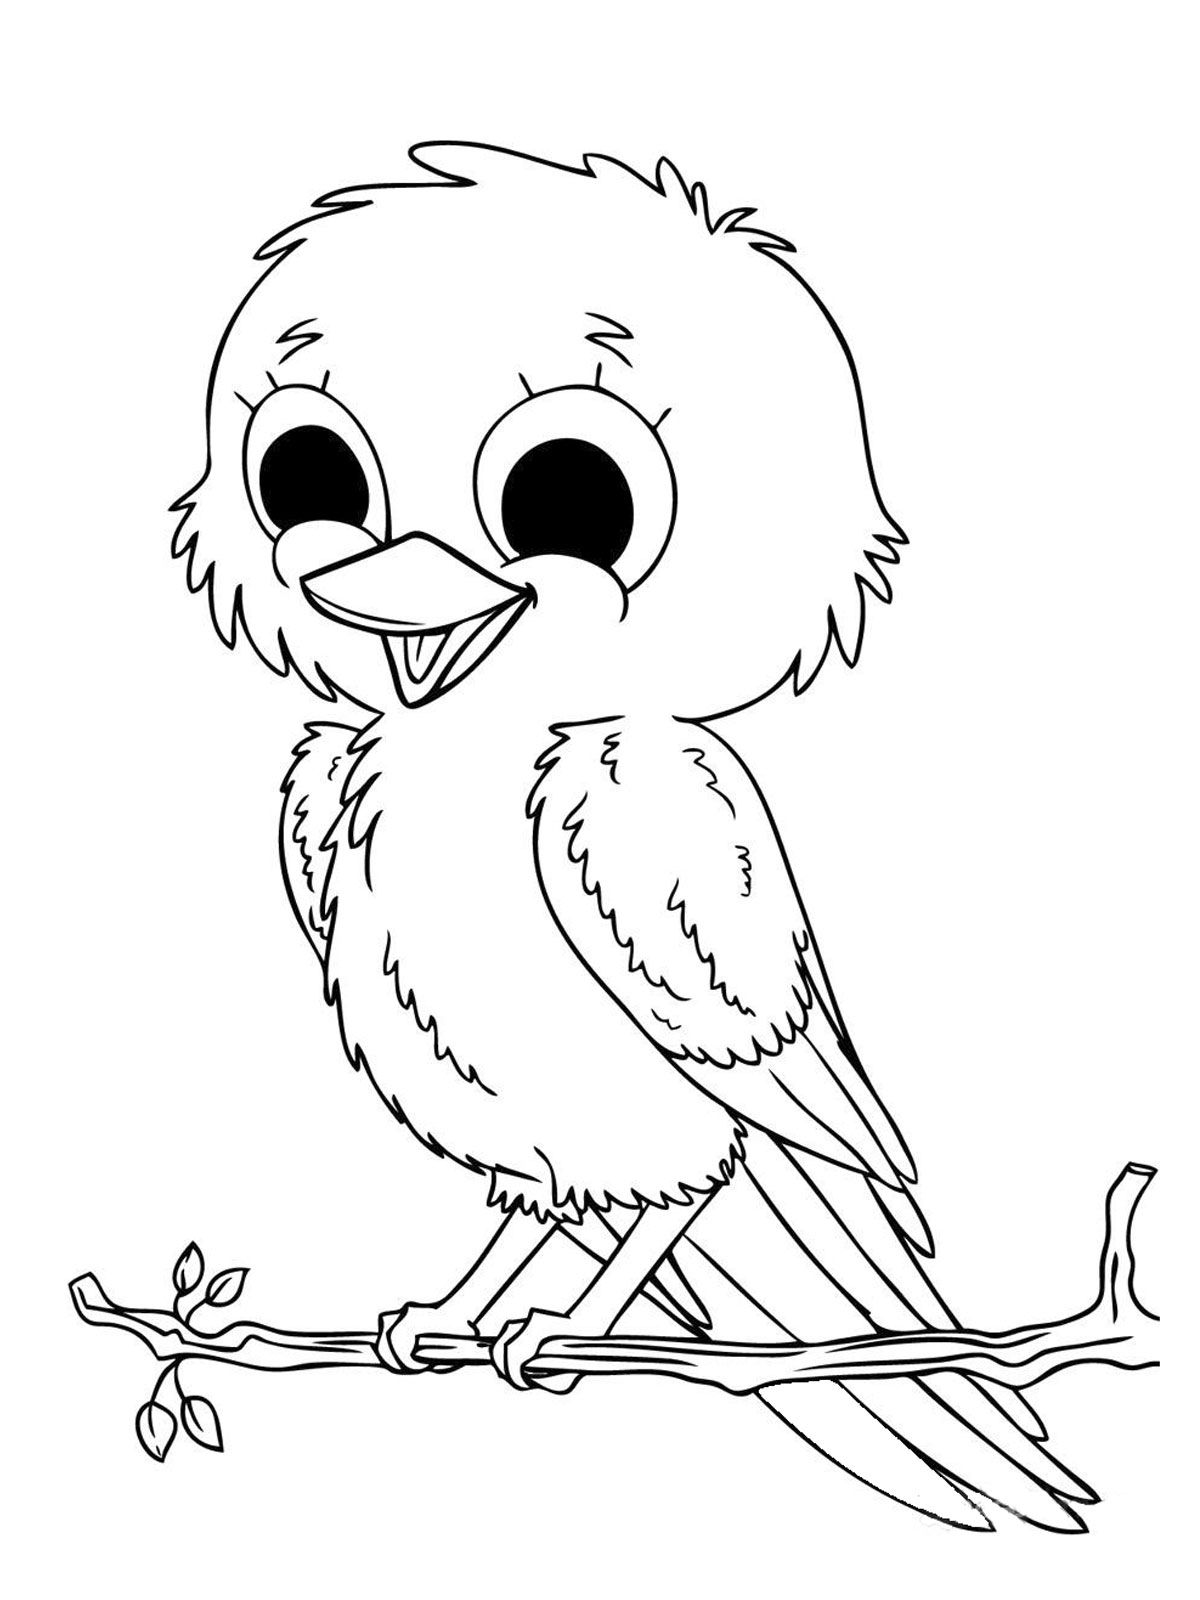 Free Cartoon Animal Coloring Pages - Coloring Home